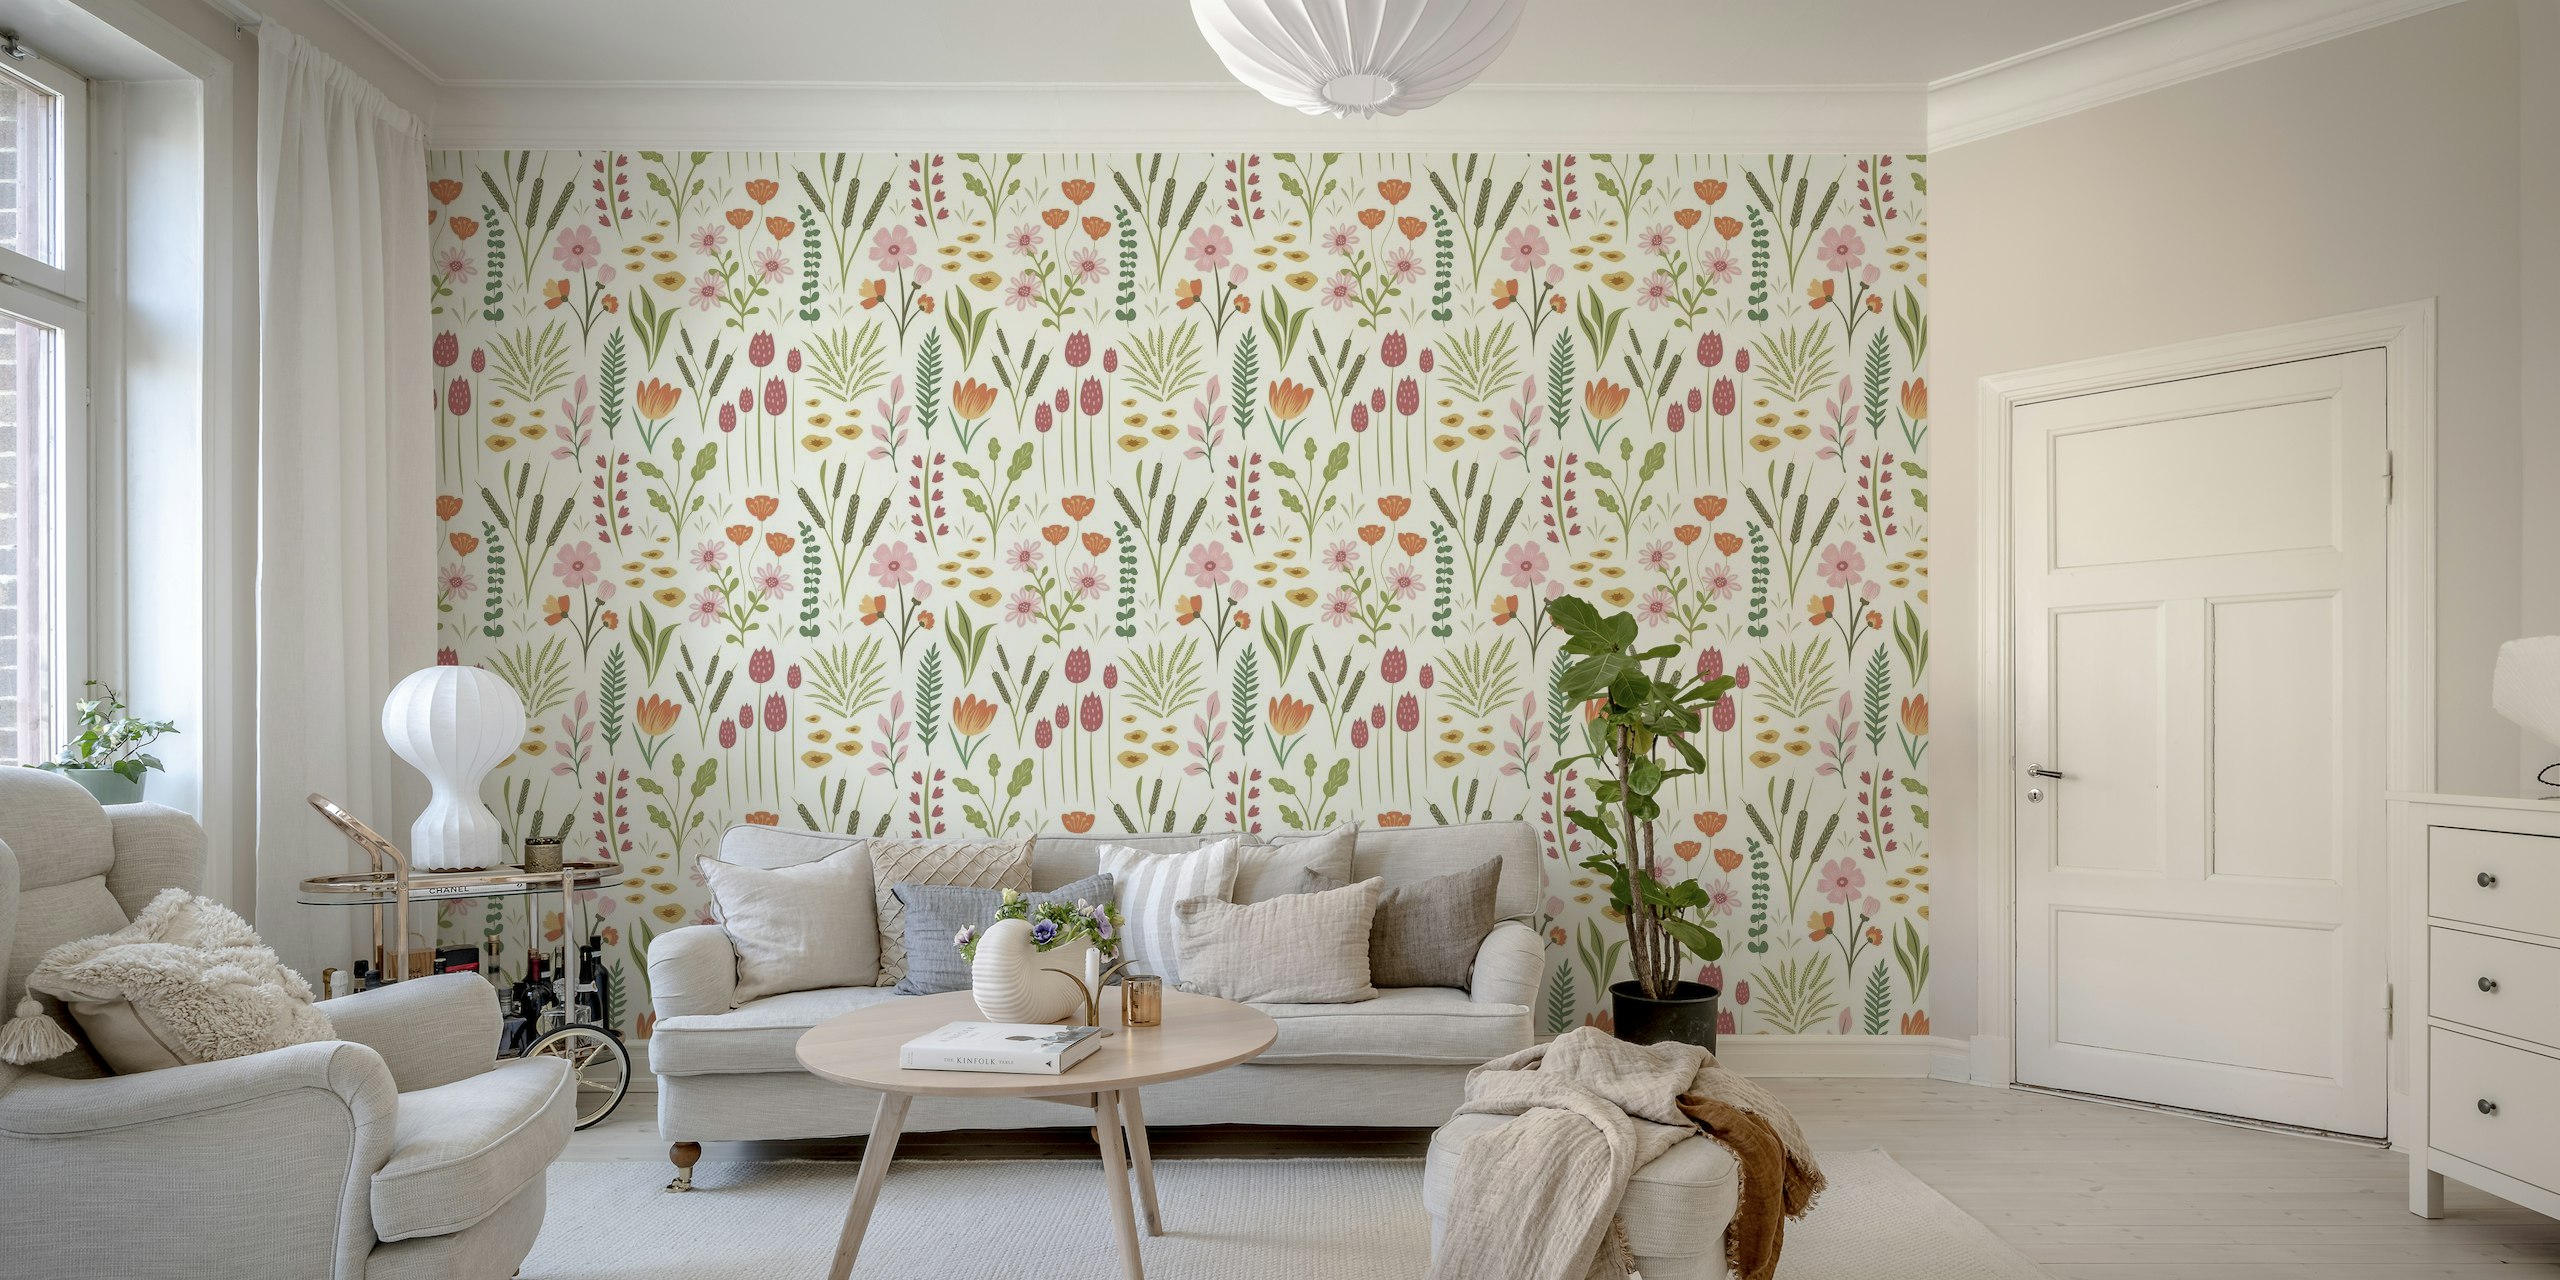 Illustrative wall mural of an array of wildflowers in pastel colors